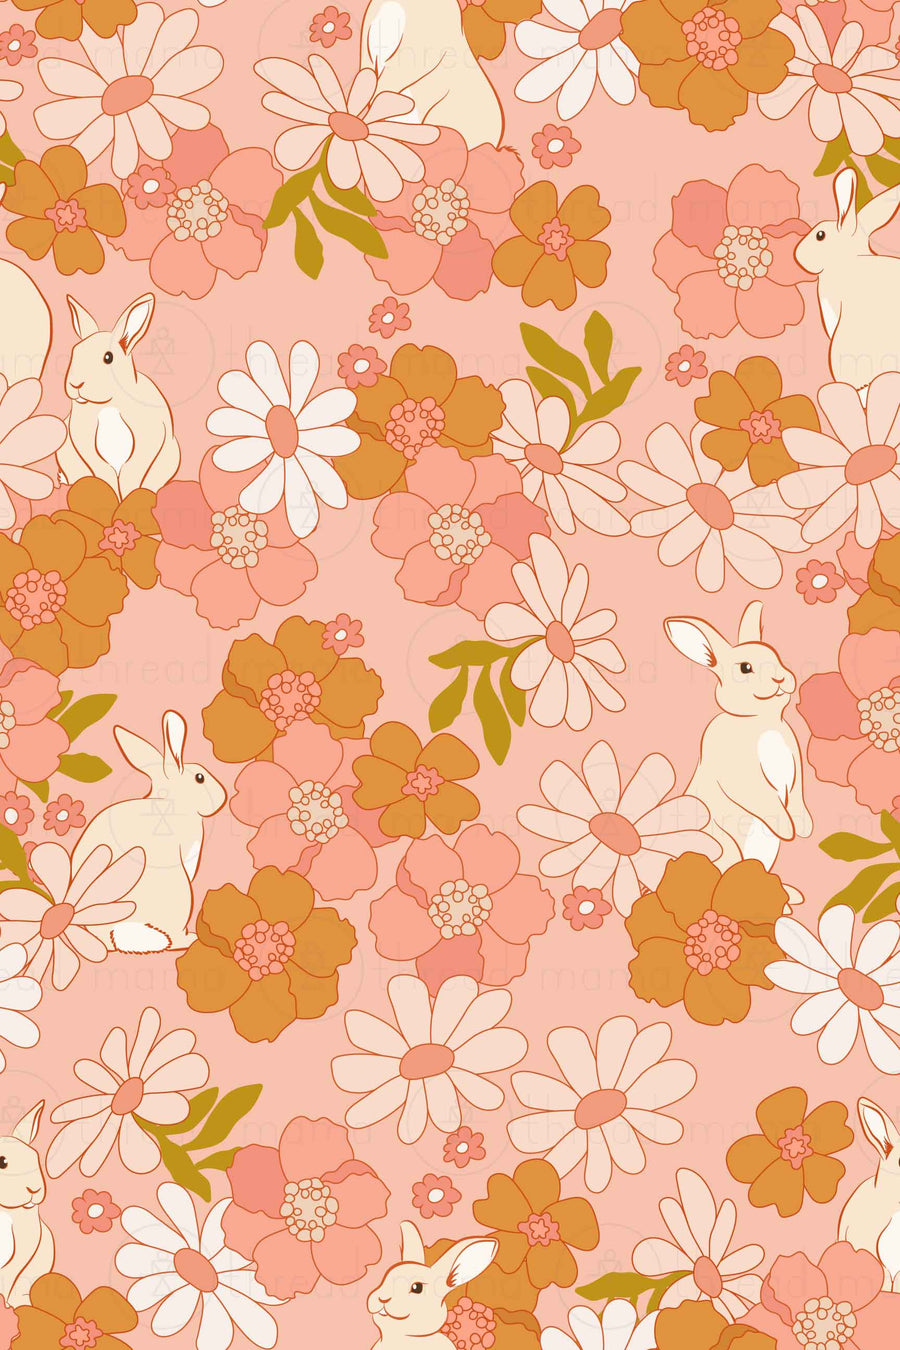 Floral Bunny Background (Printable Poster)